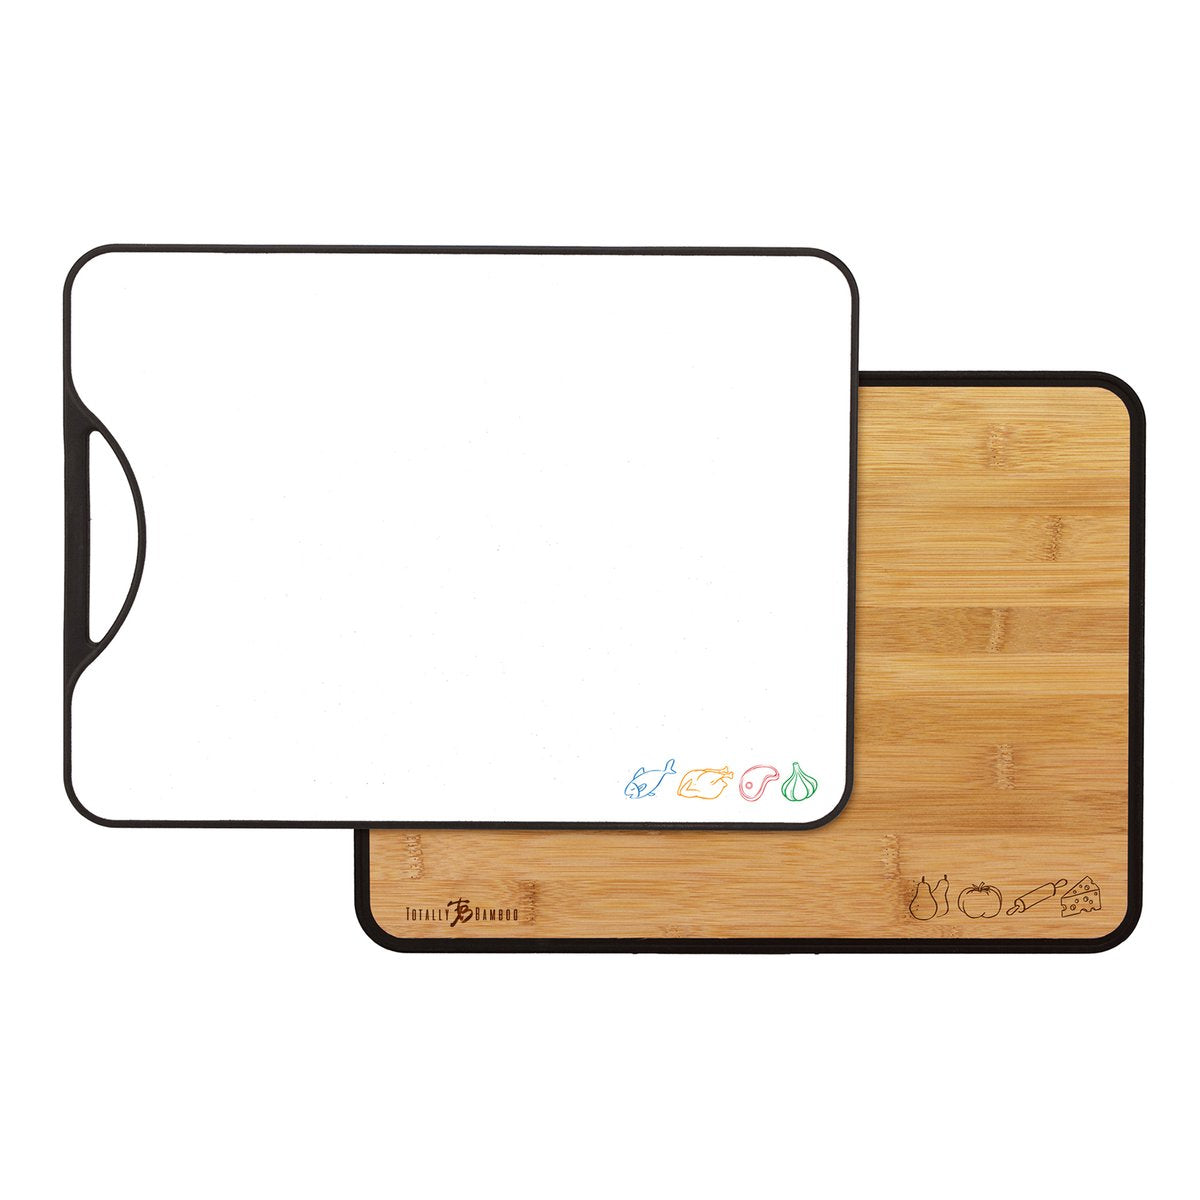 View Totally Bamboo - Polyboo Bamboo & Poly Cutting Board